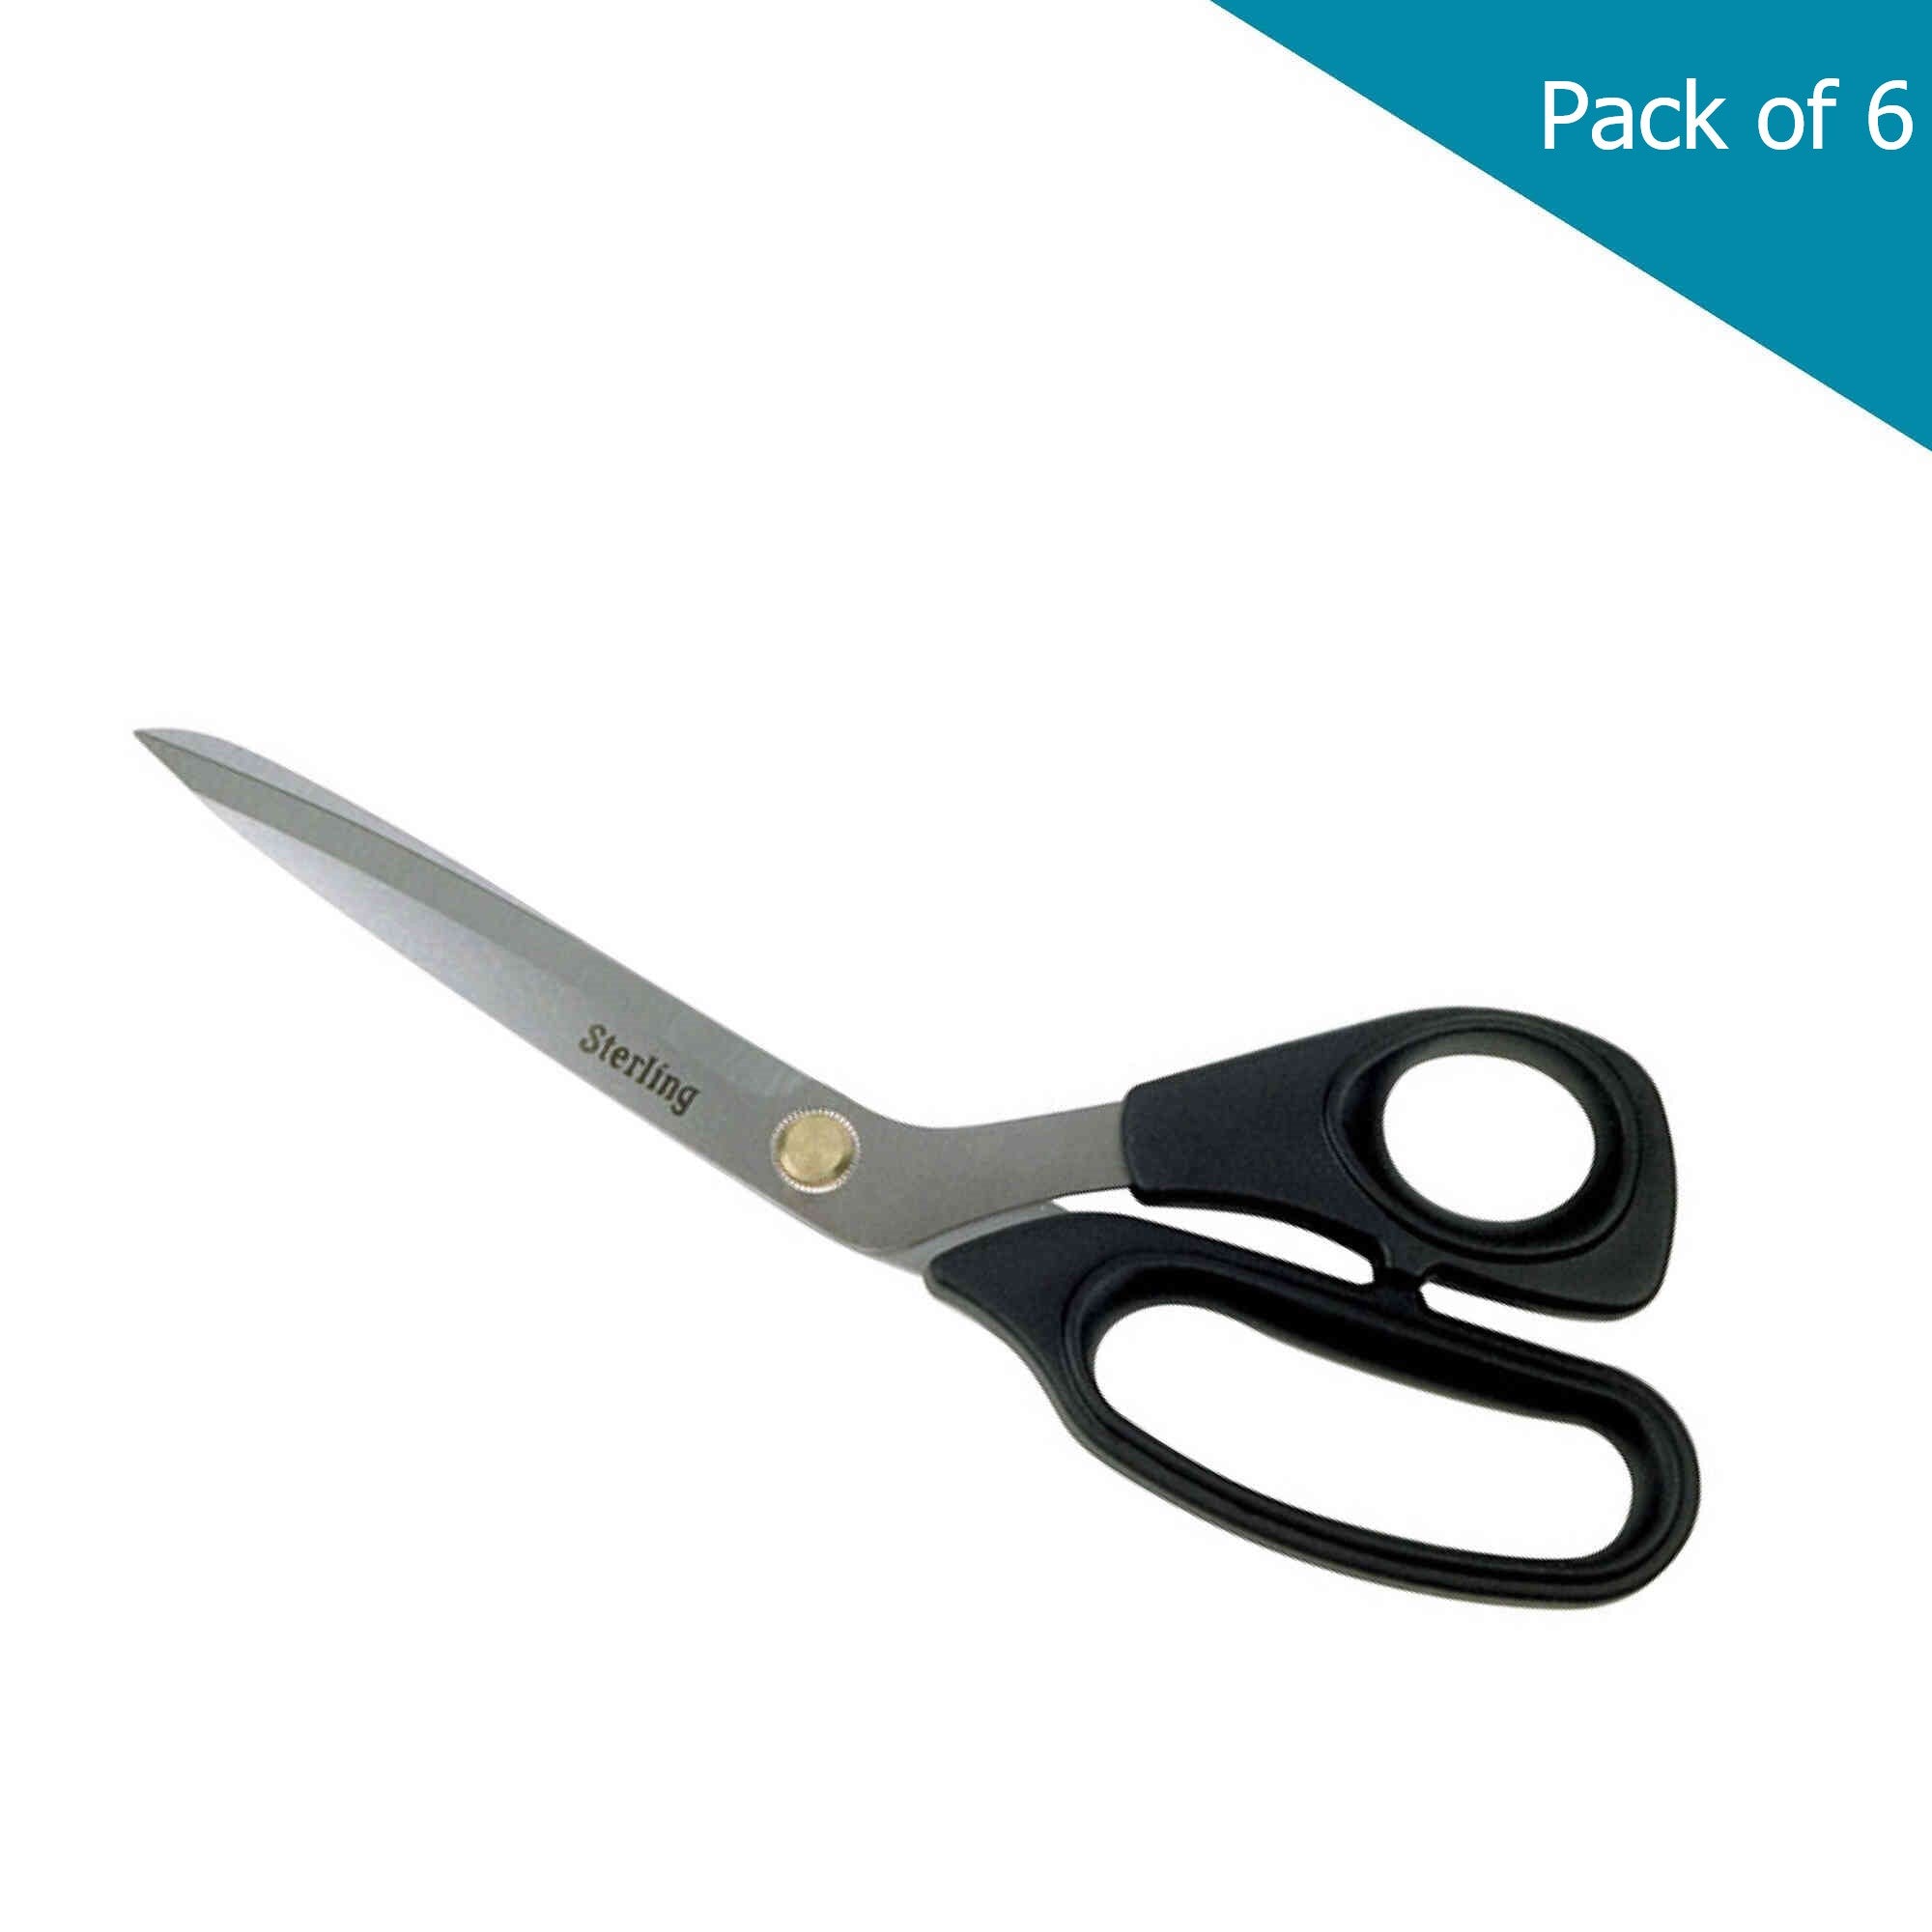 Sterling 11inch Serrated Tailor Shears Black Panther (6pack)